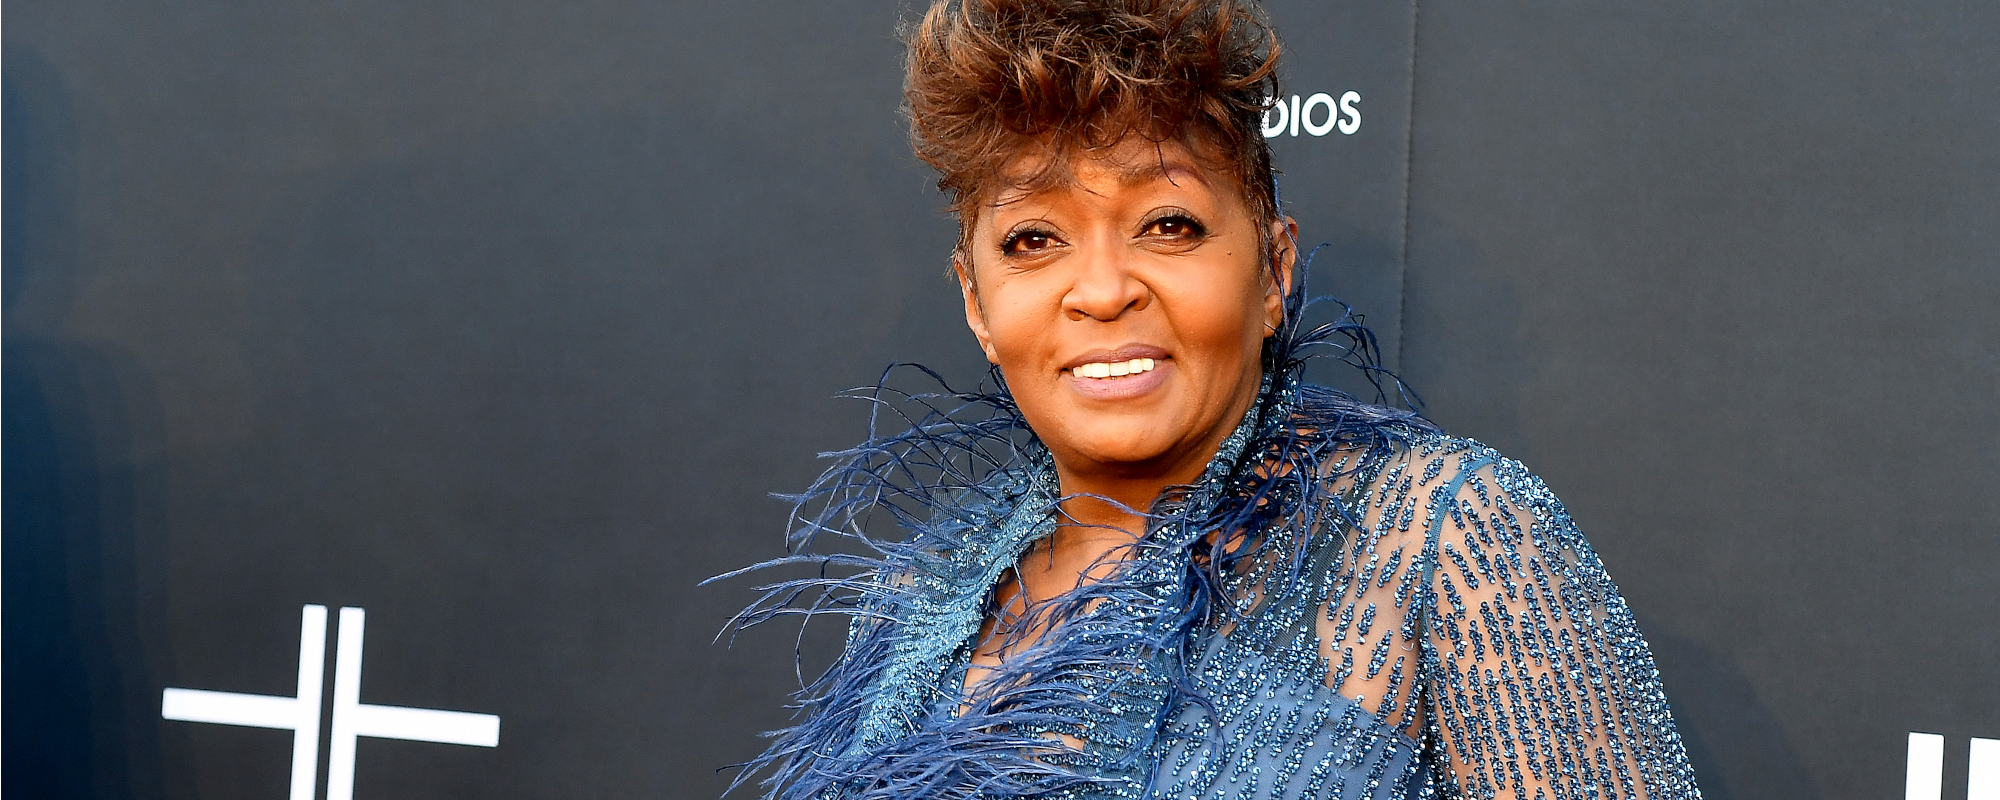 Anita Baker Quotes Beyoncé in Response to Recent Backlash Over Houston Show